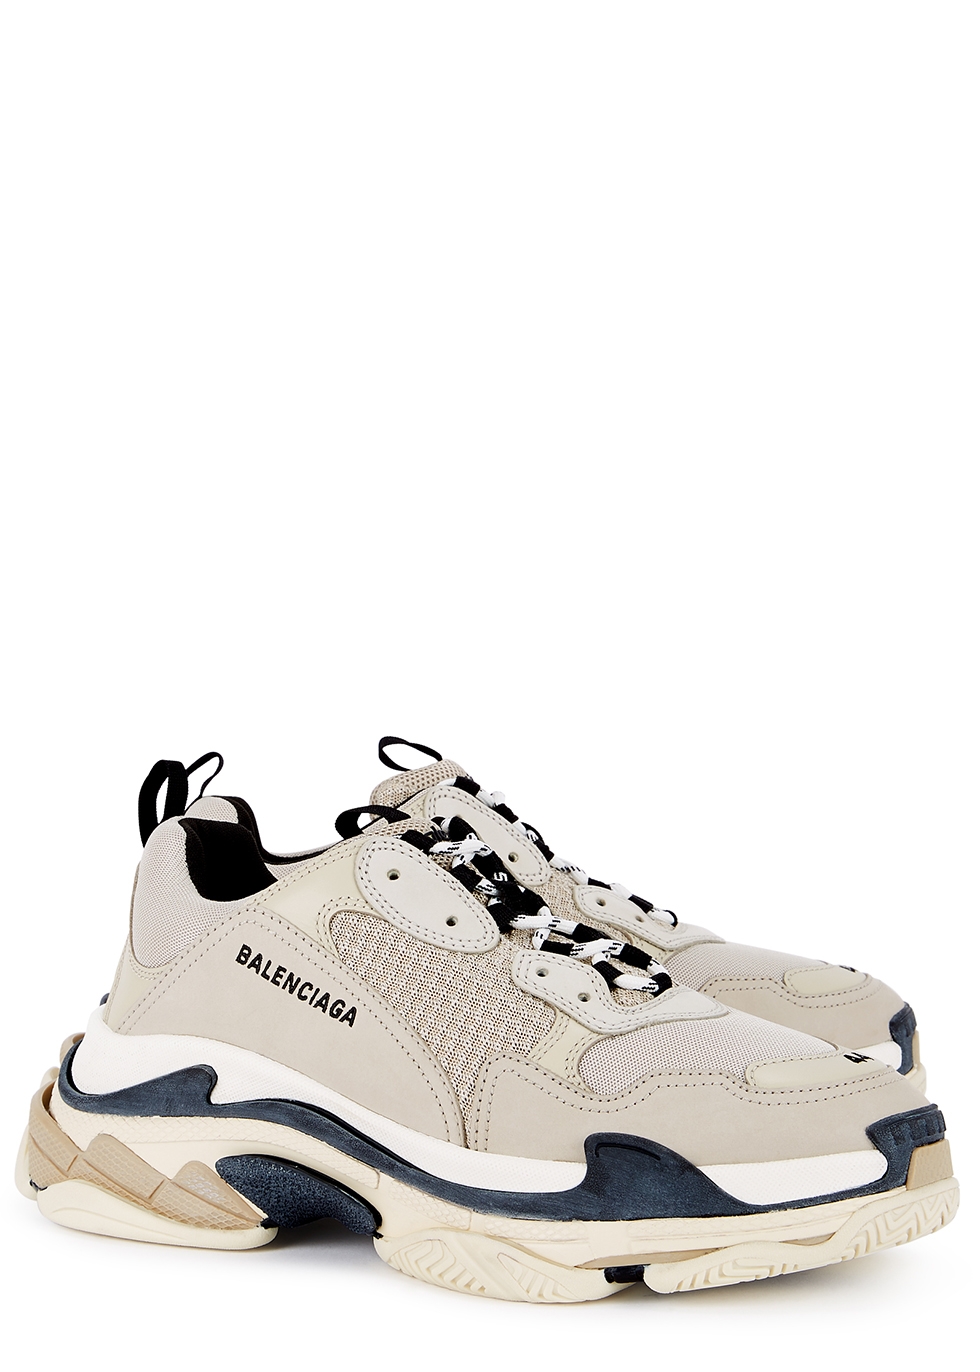 An in depth Review of Balenciaga Triple S Clear Sole White from